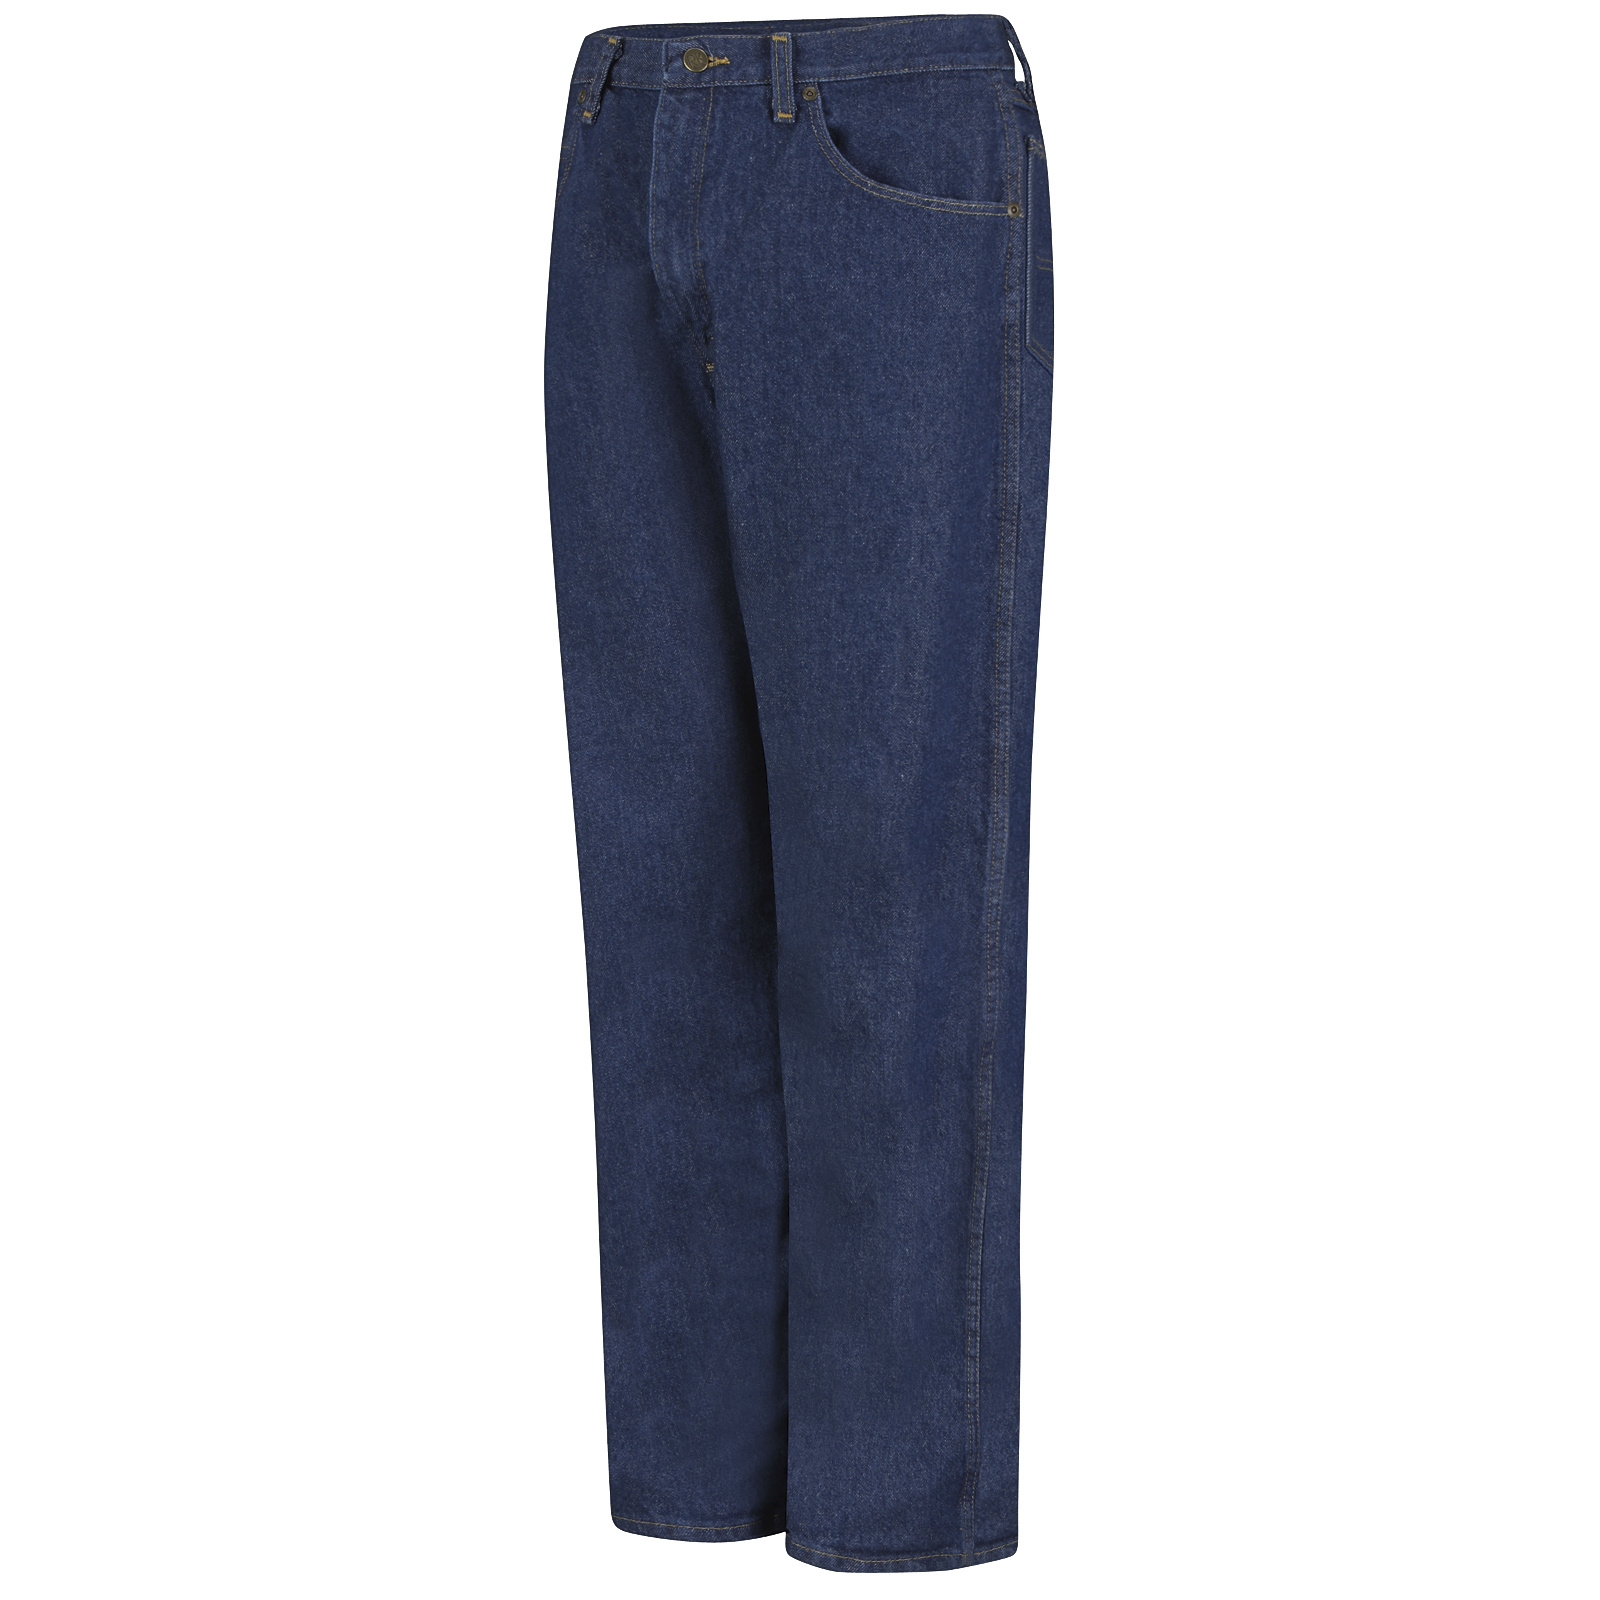 Red KapÂ® Men's Relaxed Fit Jean - image 1 of 2